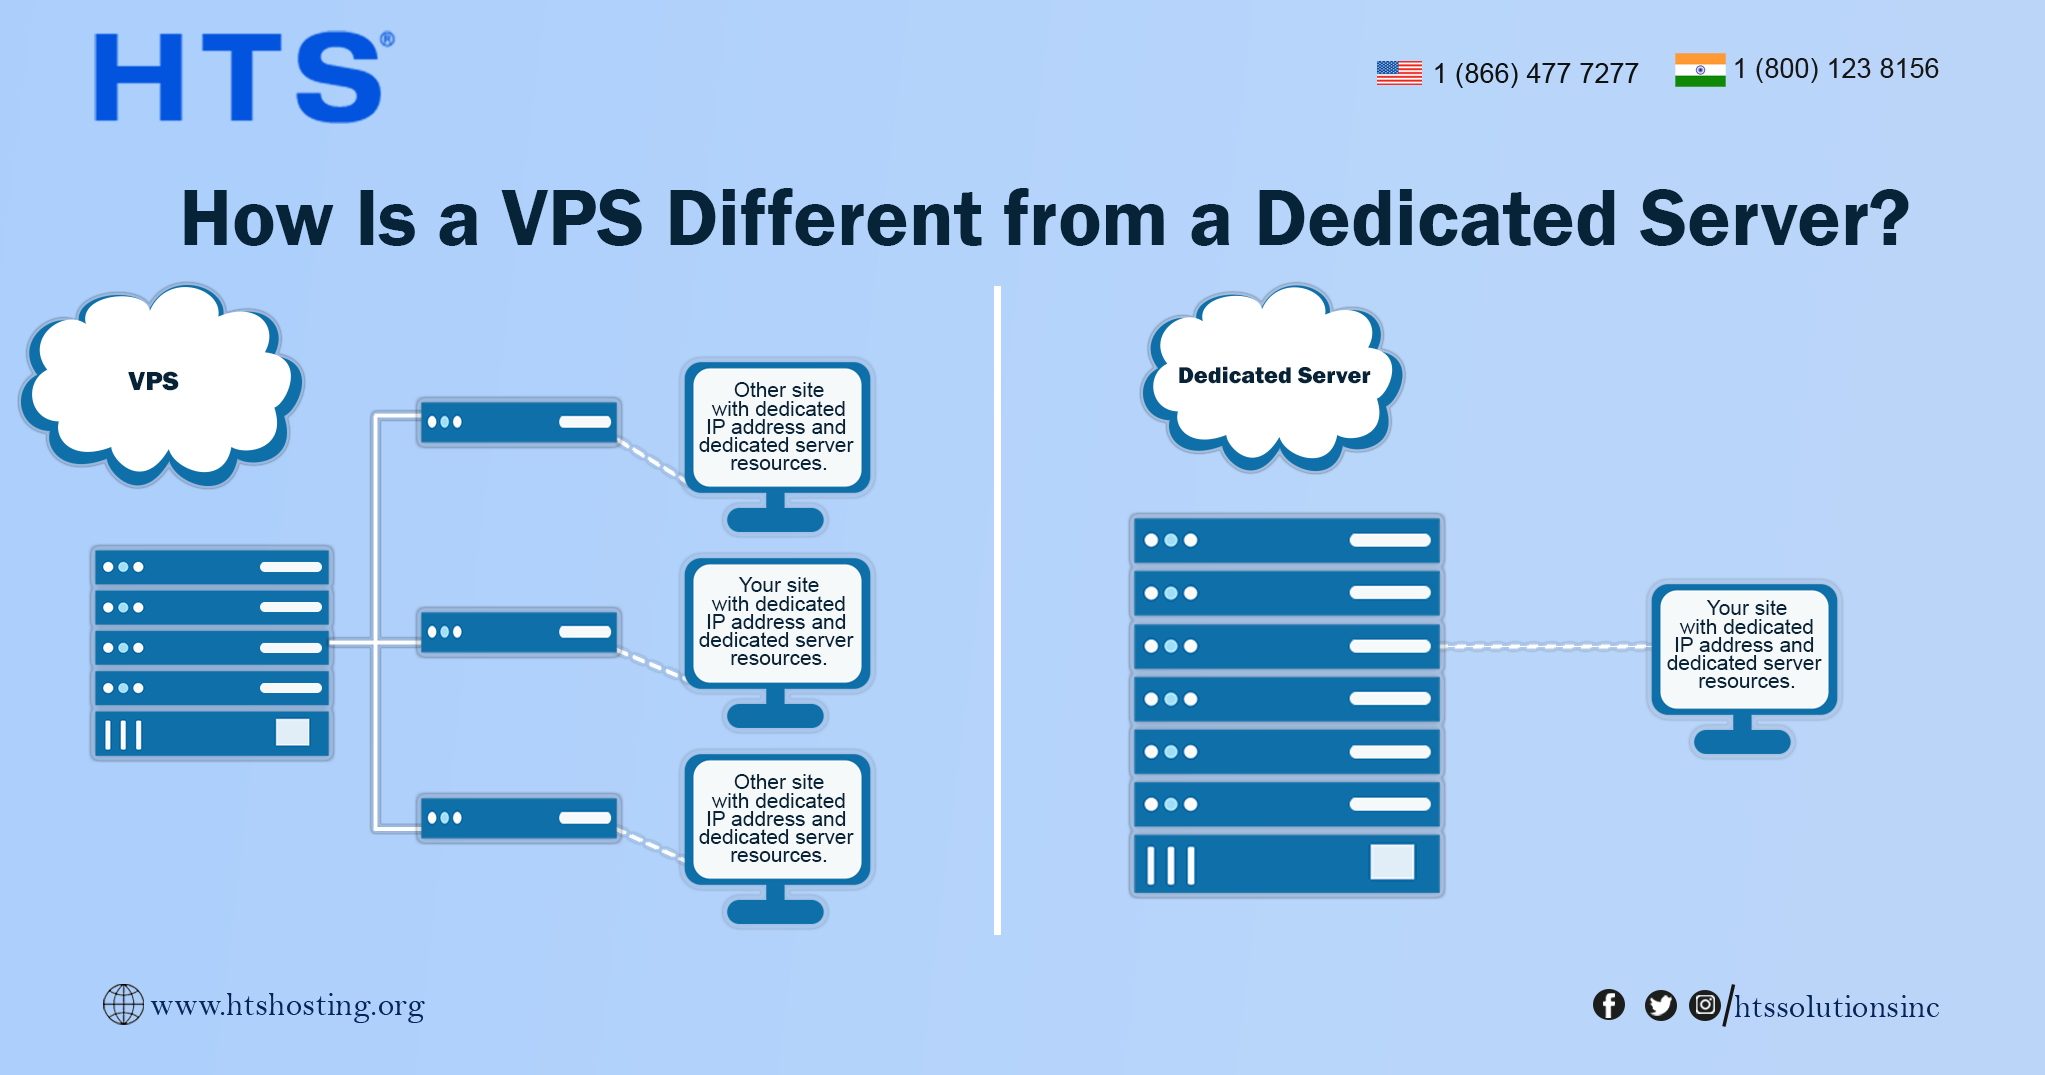 How Is a VPS Different from a Dedicated Server?